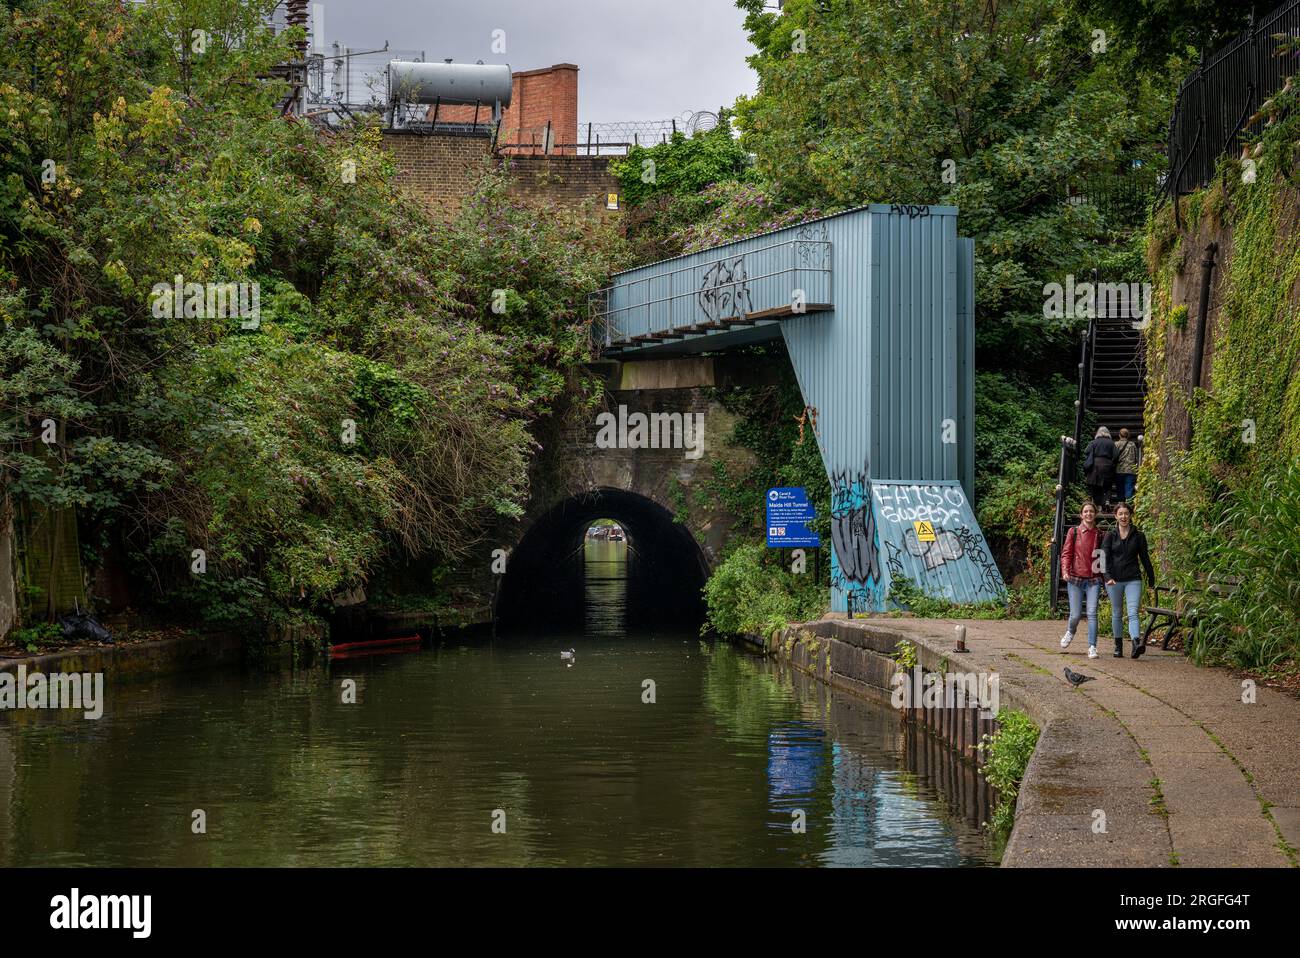 London, UK: Maida Hill Tunnel on Regent's Canal in London. The tunnel is in Maida Vale near Little Venice. Stock Photo